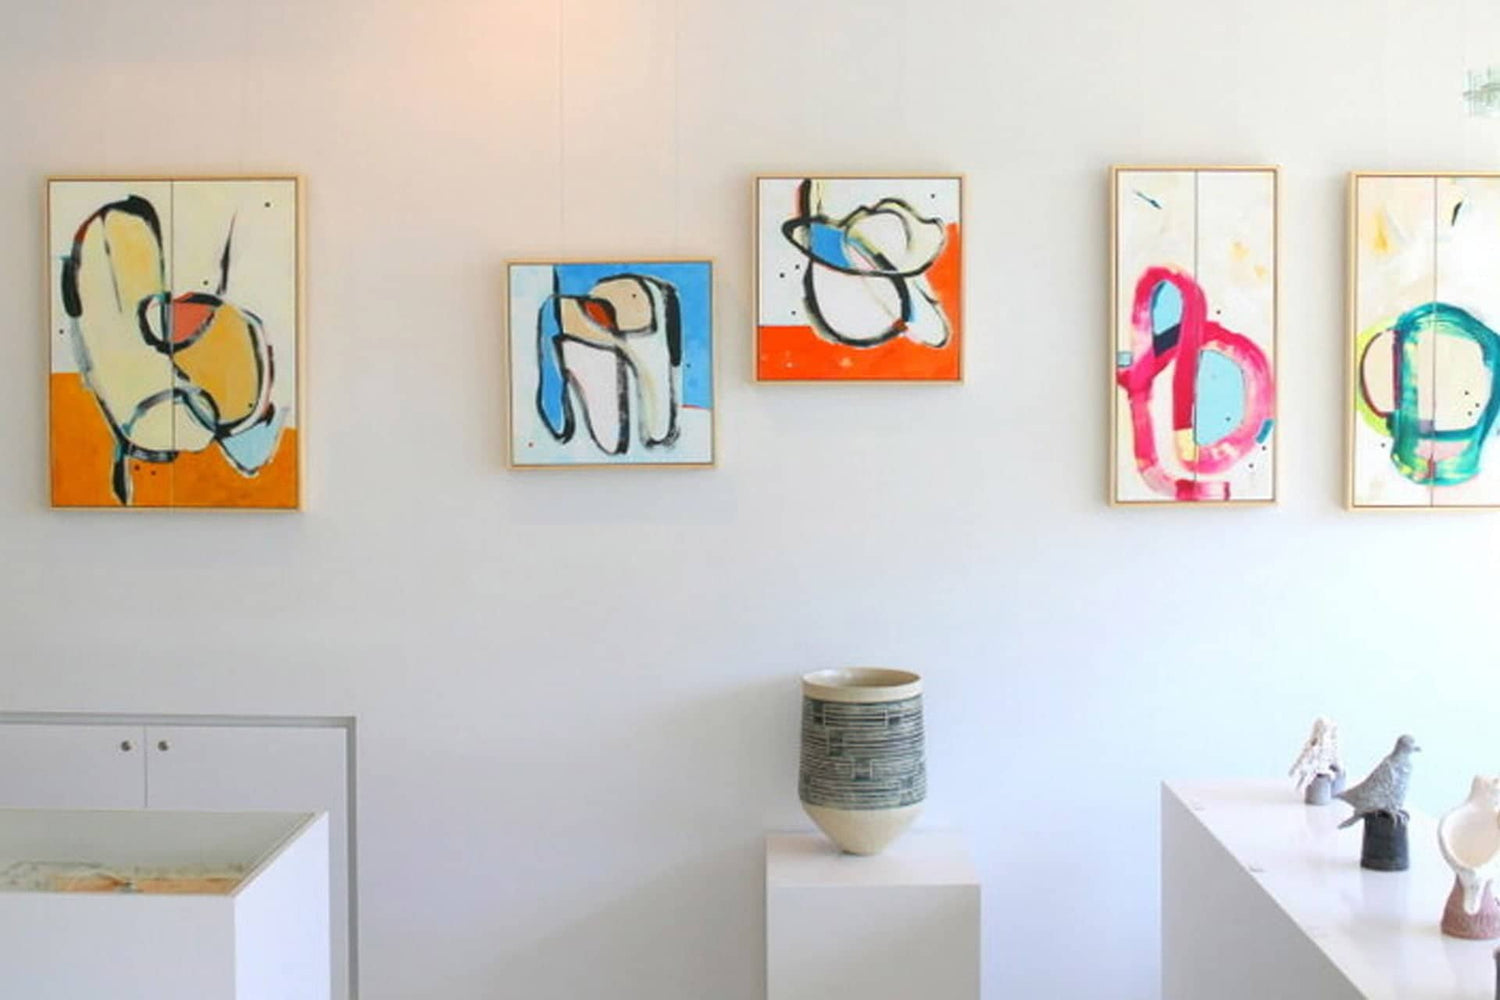 Selection of paintings by Kirsty Black in NZ art galleries